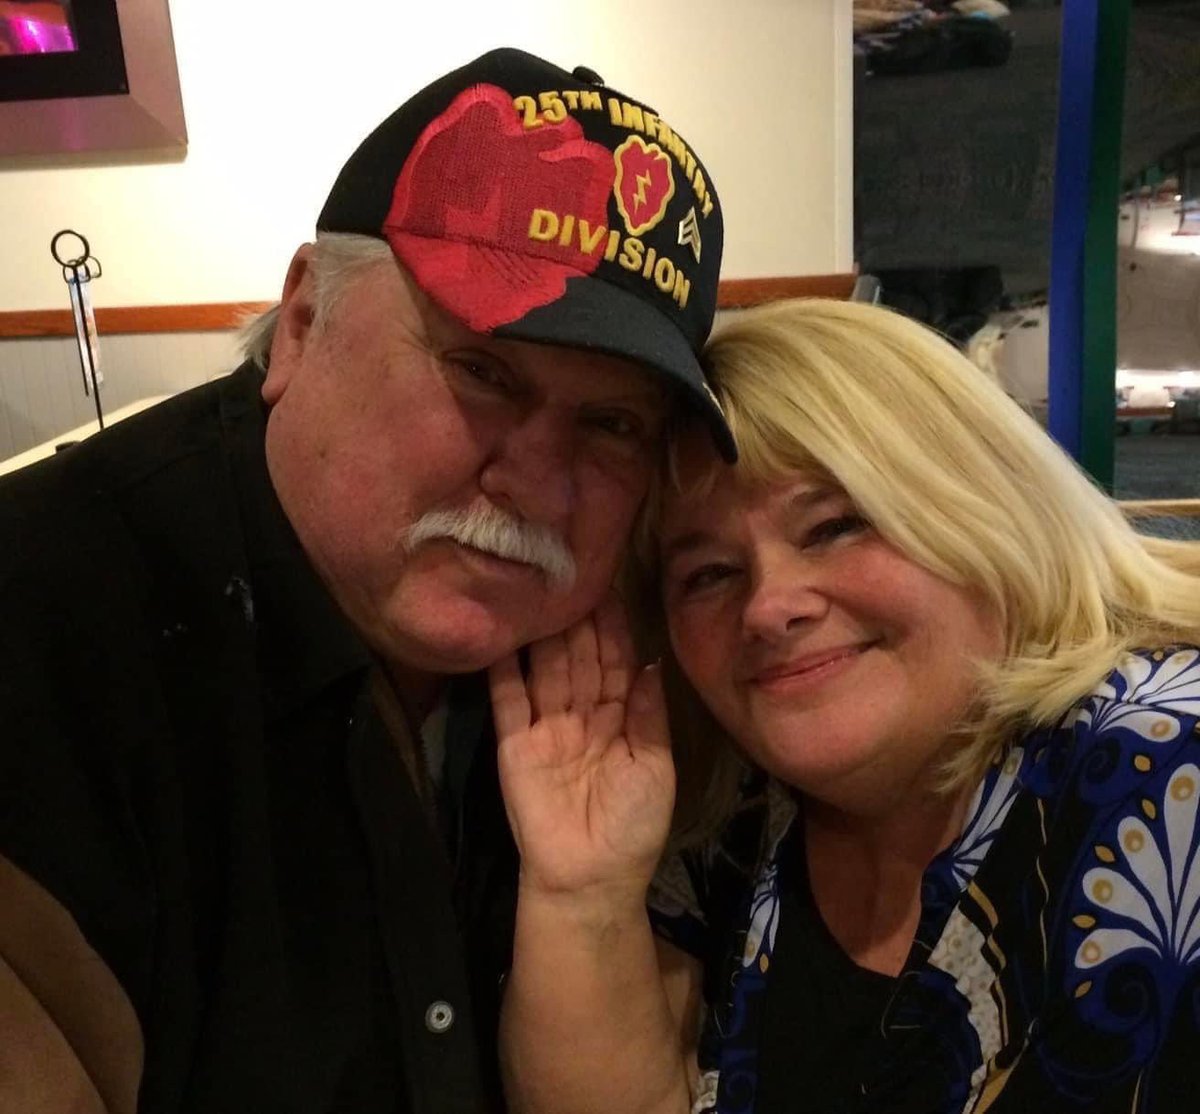 ”We were married nearly 48 years. This loss is overwhelming! His second Vietnam war was with AGent Orange. He was just as tough at 74, as he was when drafted at 18.” - Joni Adkins 
#VietnamWar #AgentOrange #RIP #Veterans